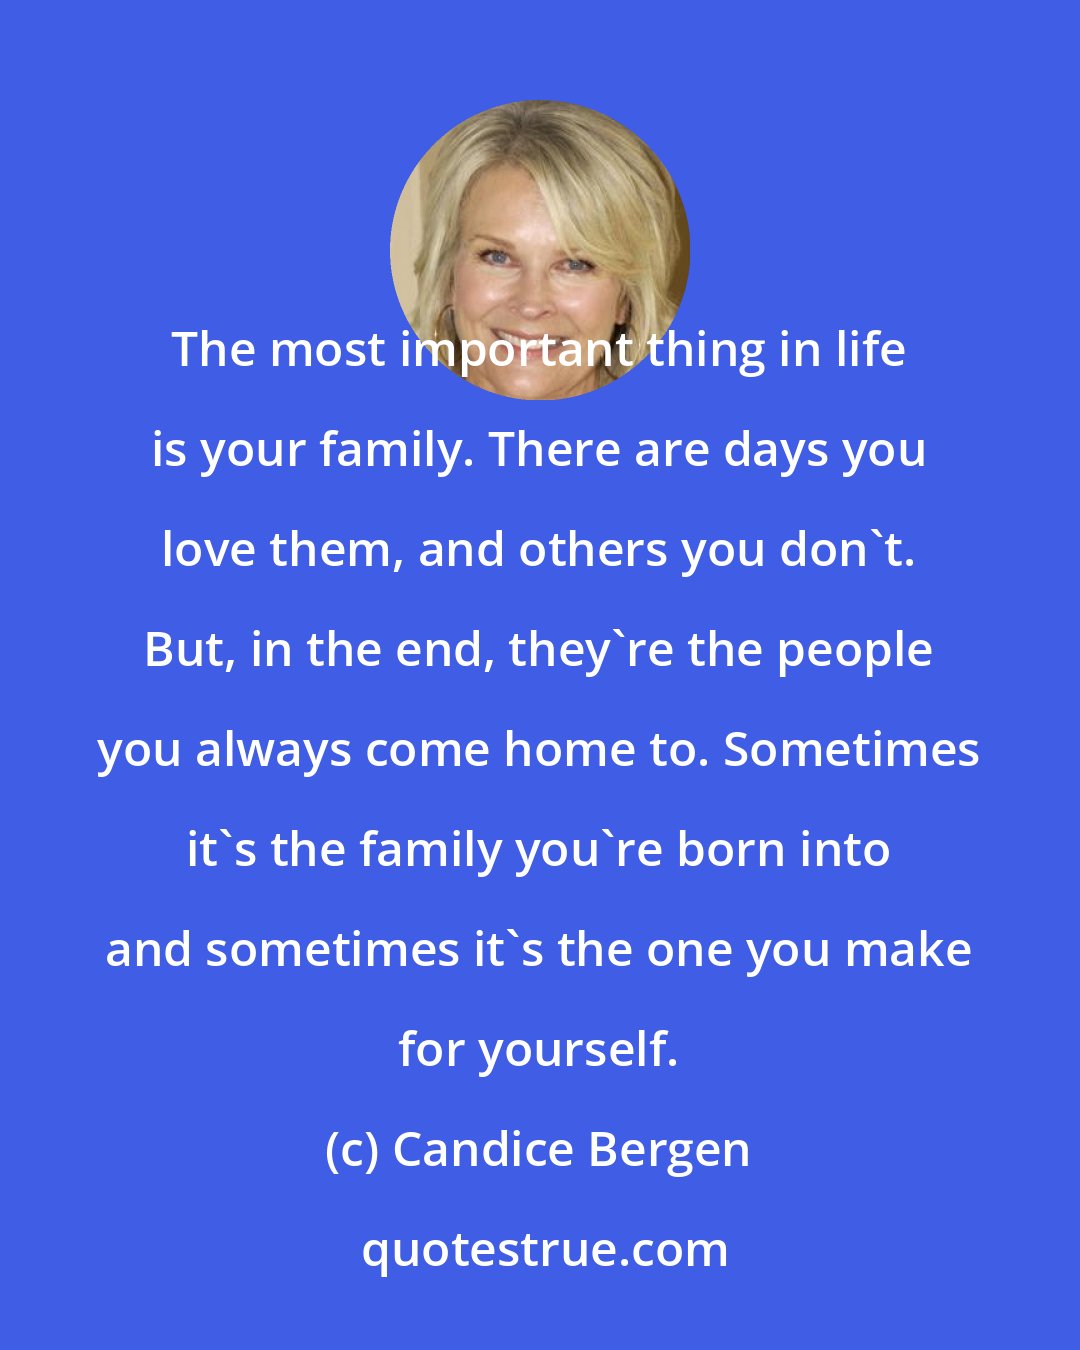 Candice Bergen: The most important thing in life is your family. There are days you love them, and others you don't. But, in the end, they're the people you always come home to. Sometimes it's the family you're born into and sometimes it's the one you make for yourself.